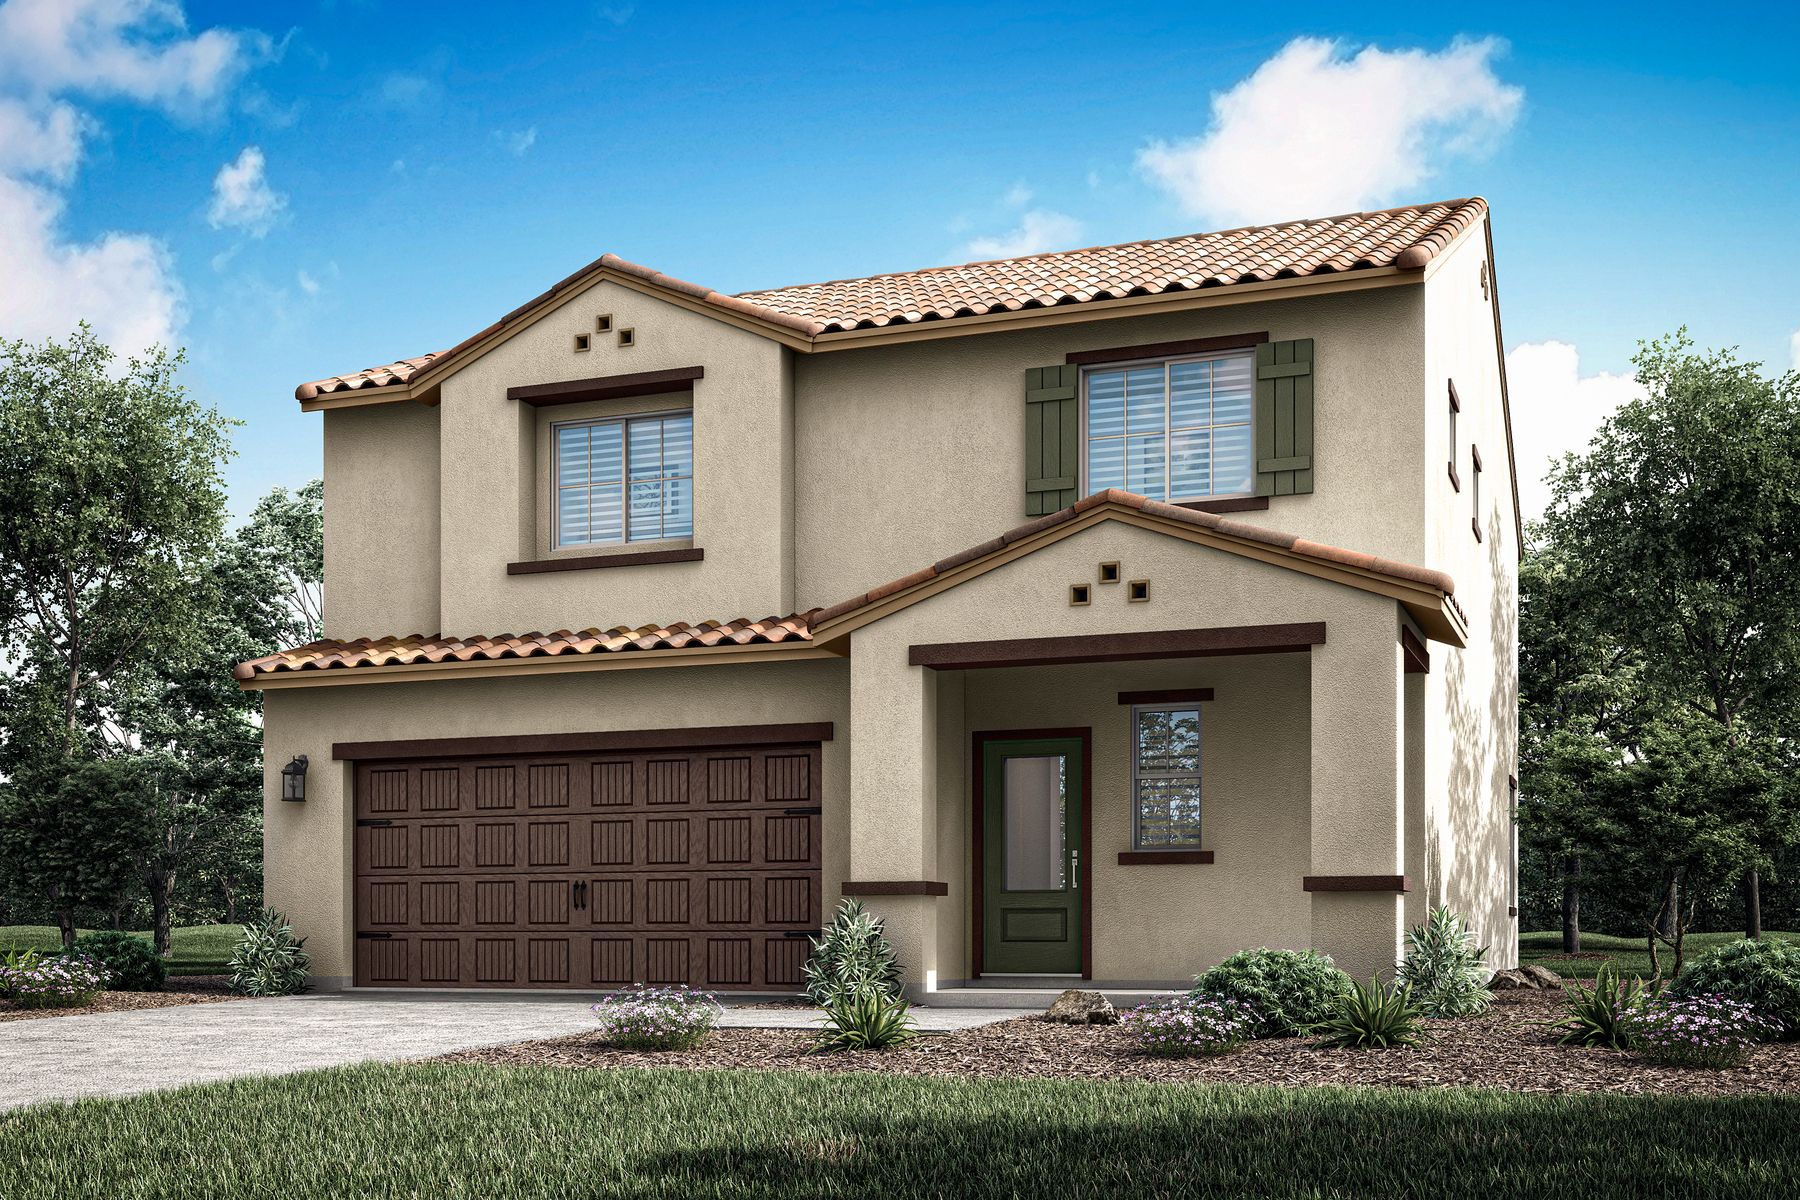 Harvest Grove by LGI Homes:Welcome home to Harvest Grove!